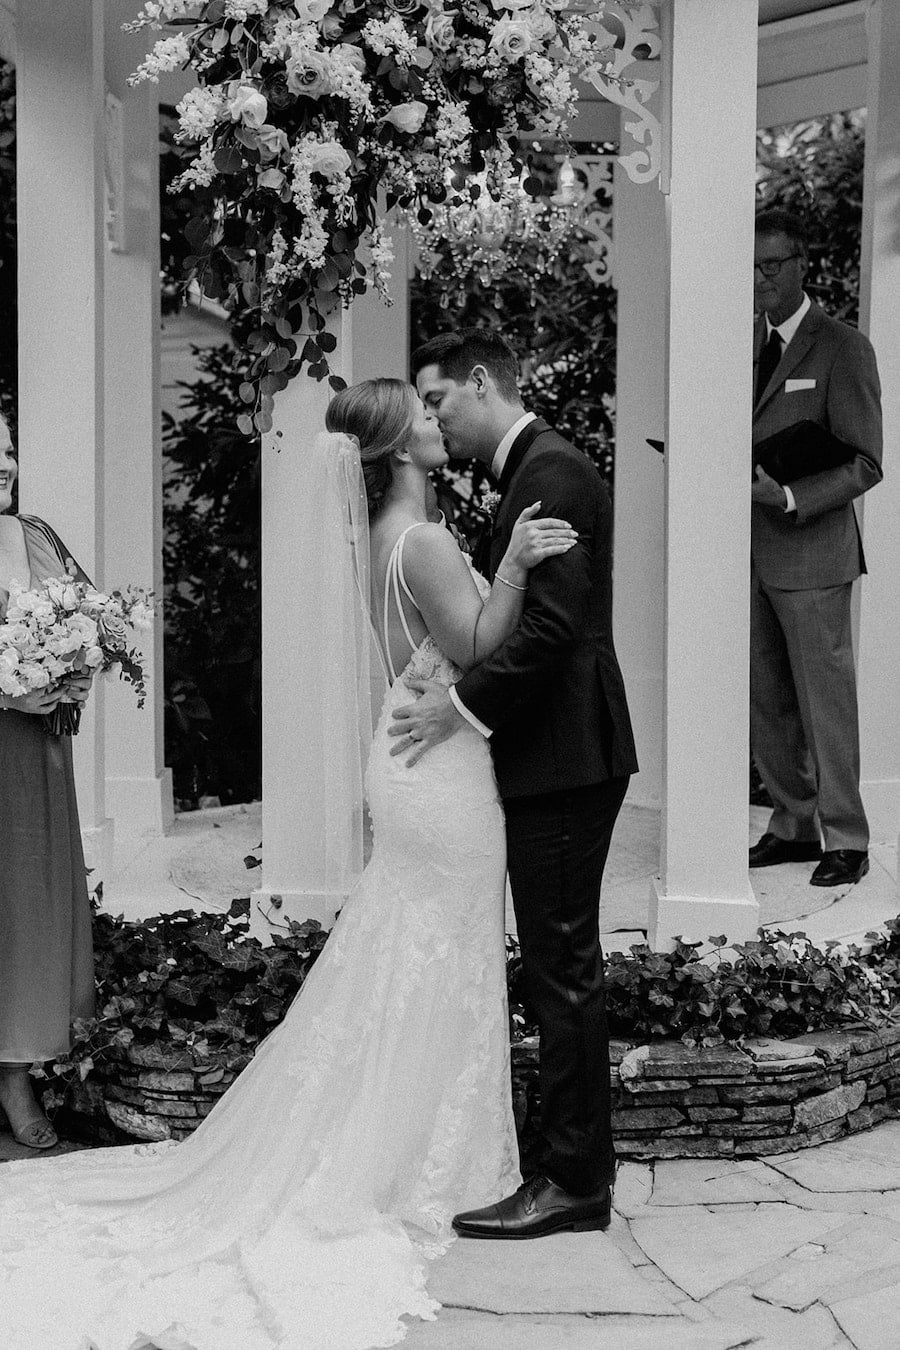 * Bride and groom walking through a romantic garden for their wedding ceremony at outdoor wedding venue CJ’s Off the Square (Franklin, TN). 